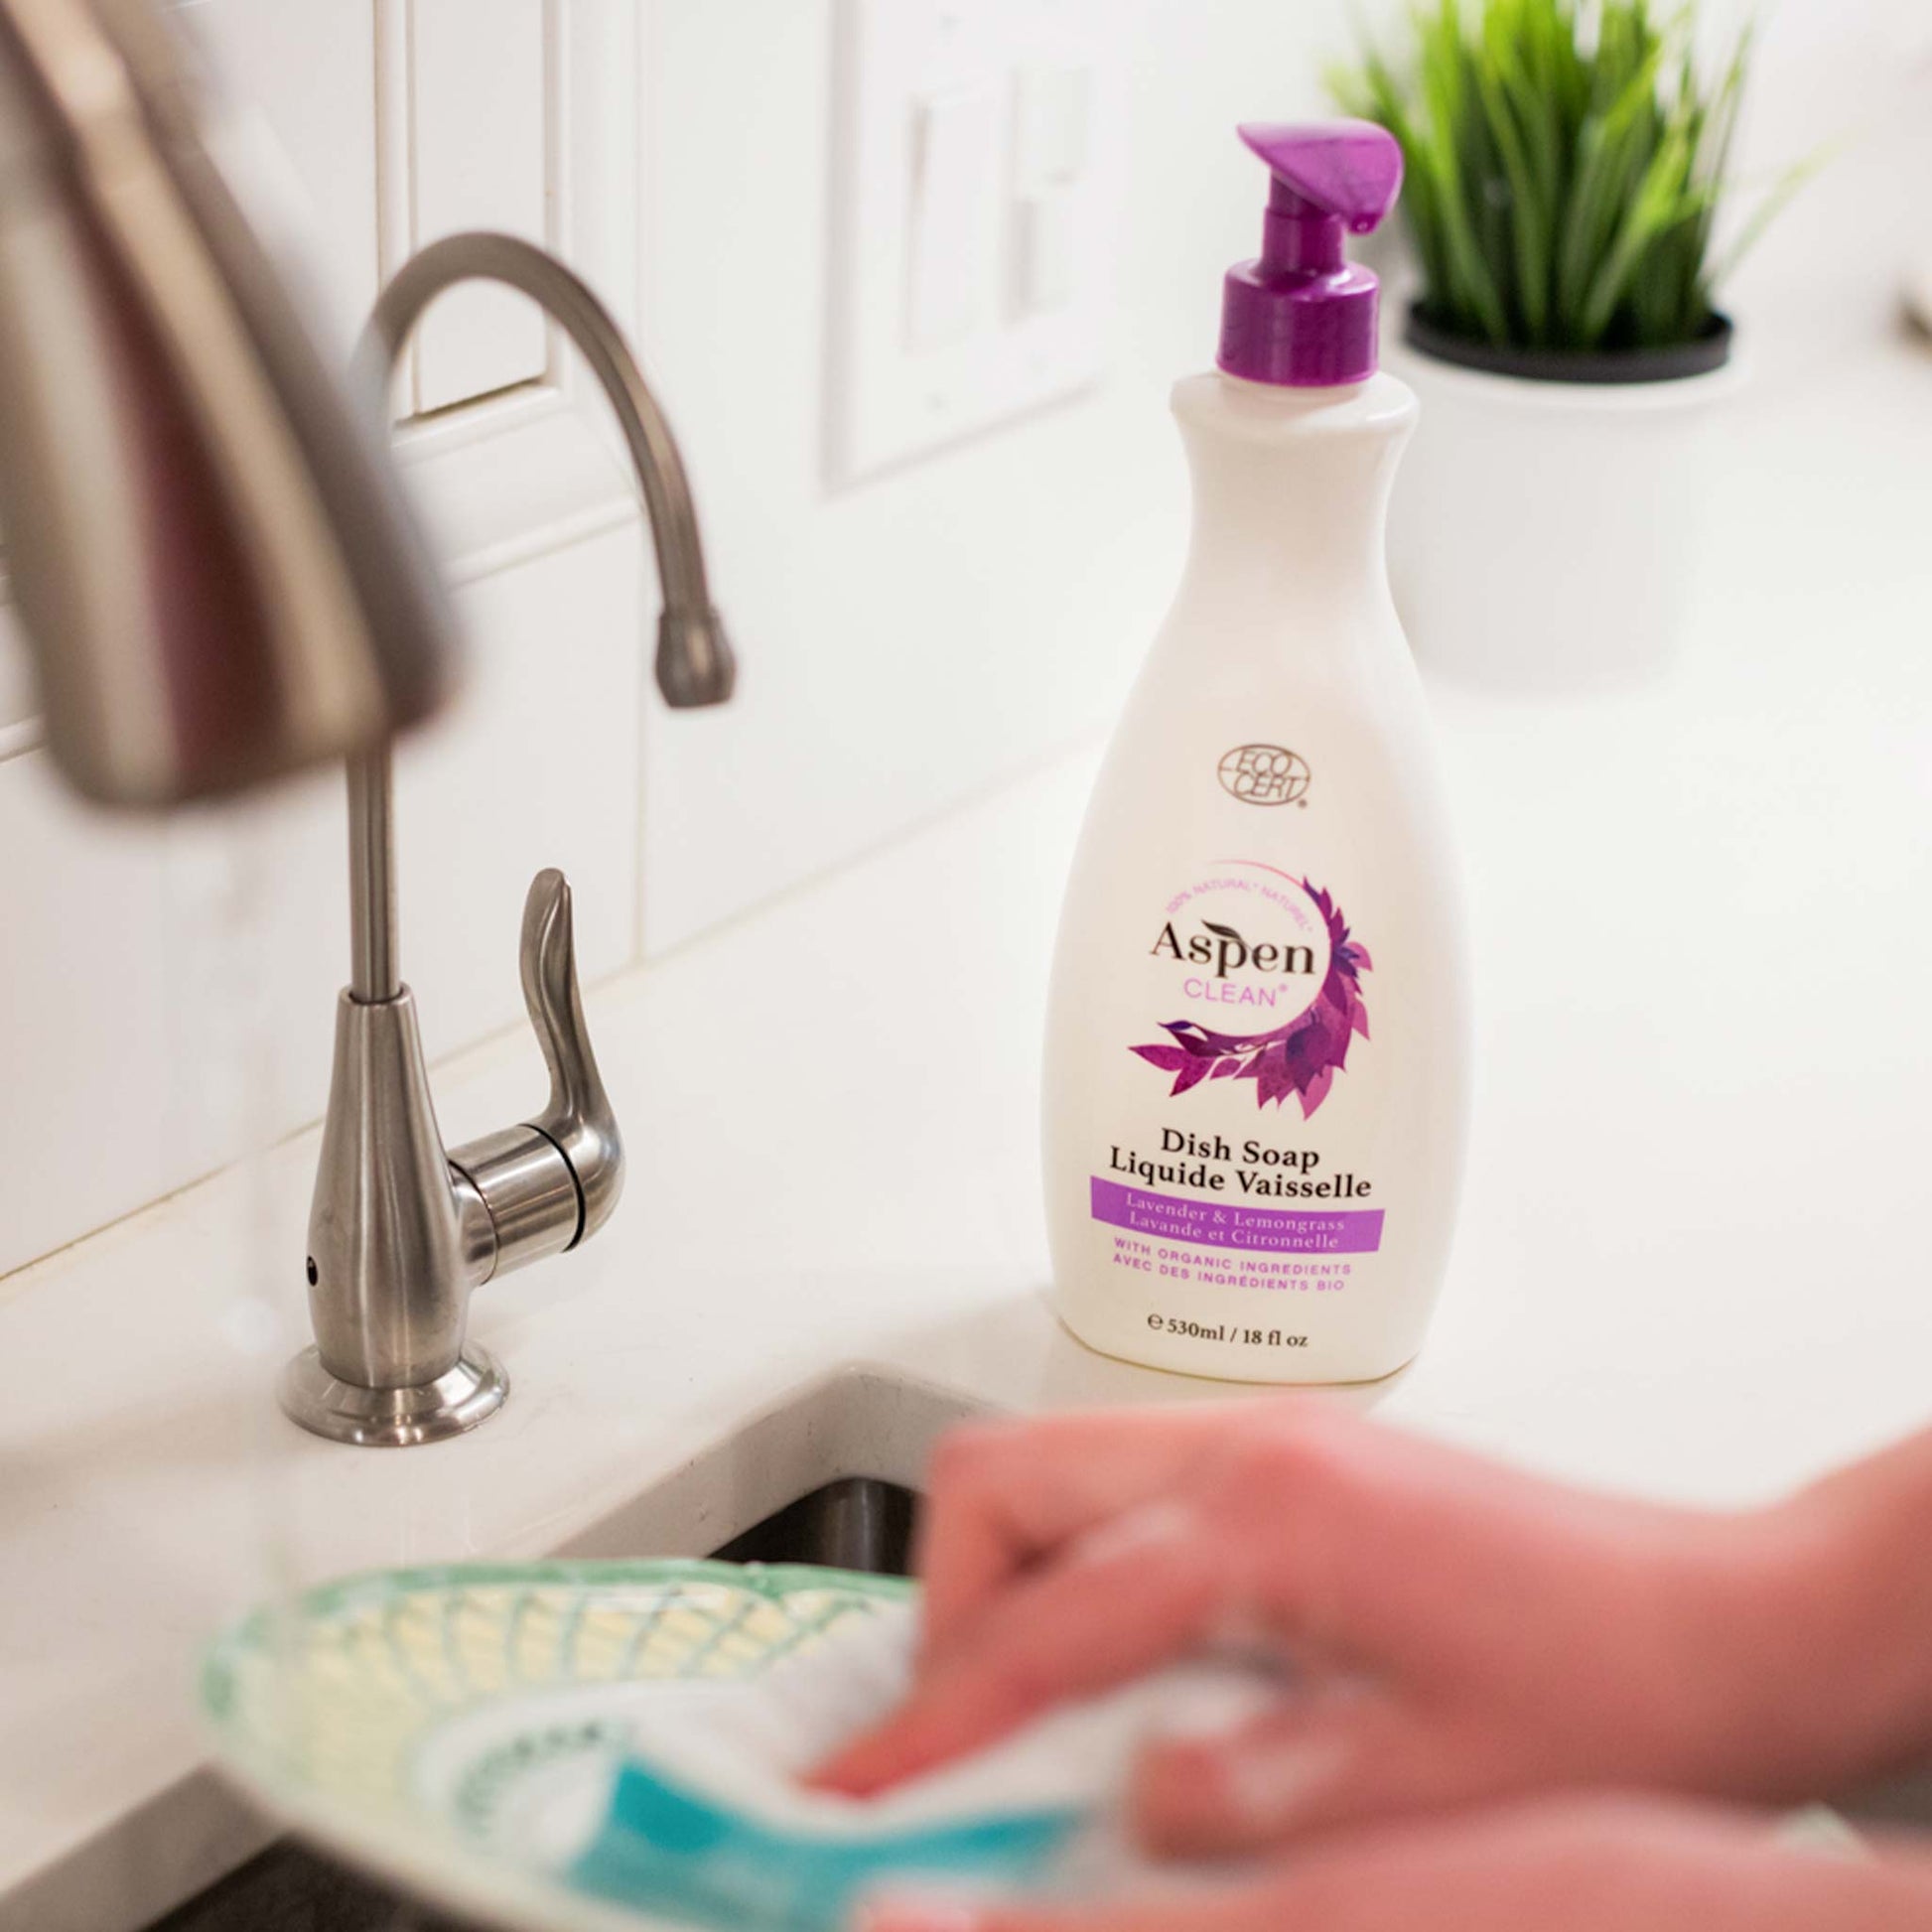 How to Wash Dishes Without Chemical Dish Soap – AspenClean